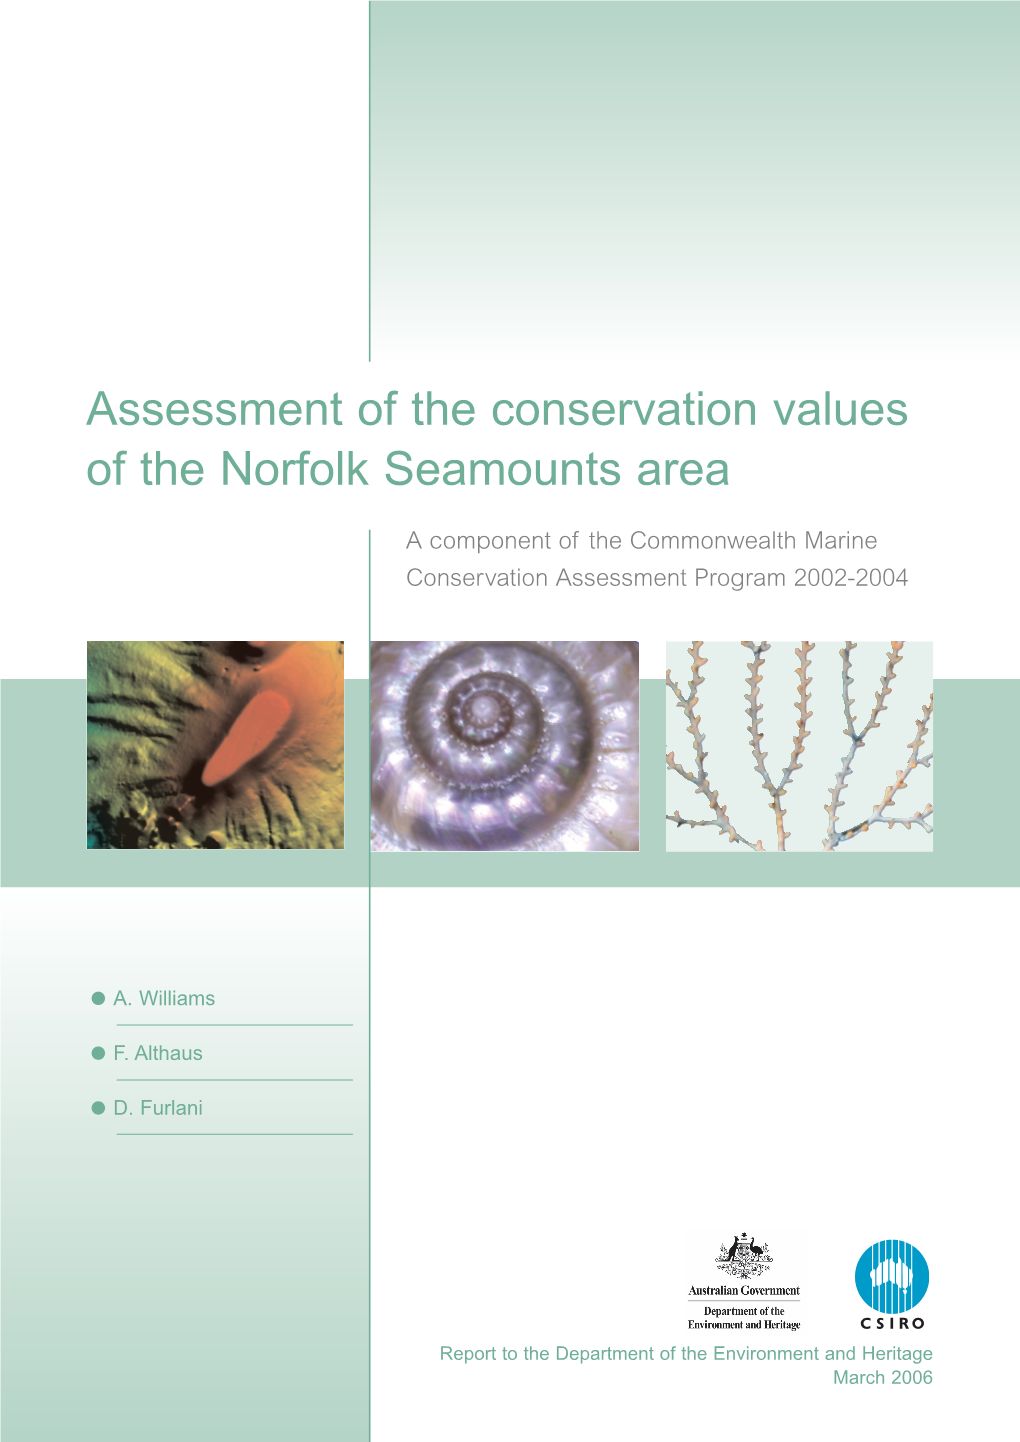 Assessment of the Conservation Values of the Norfolk Seamounts Area